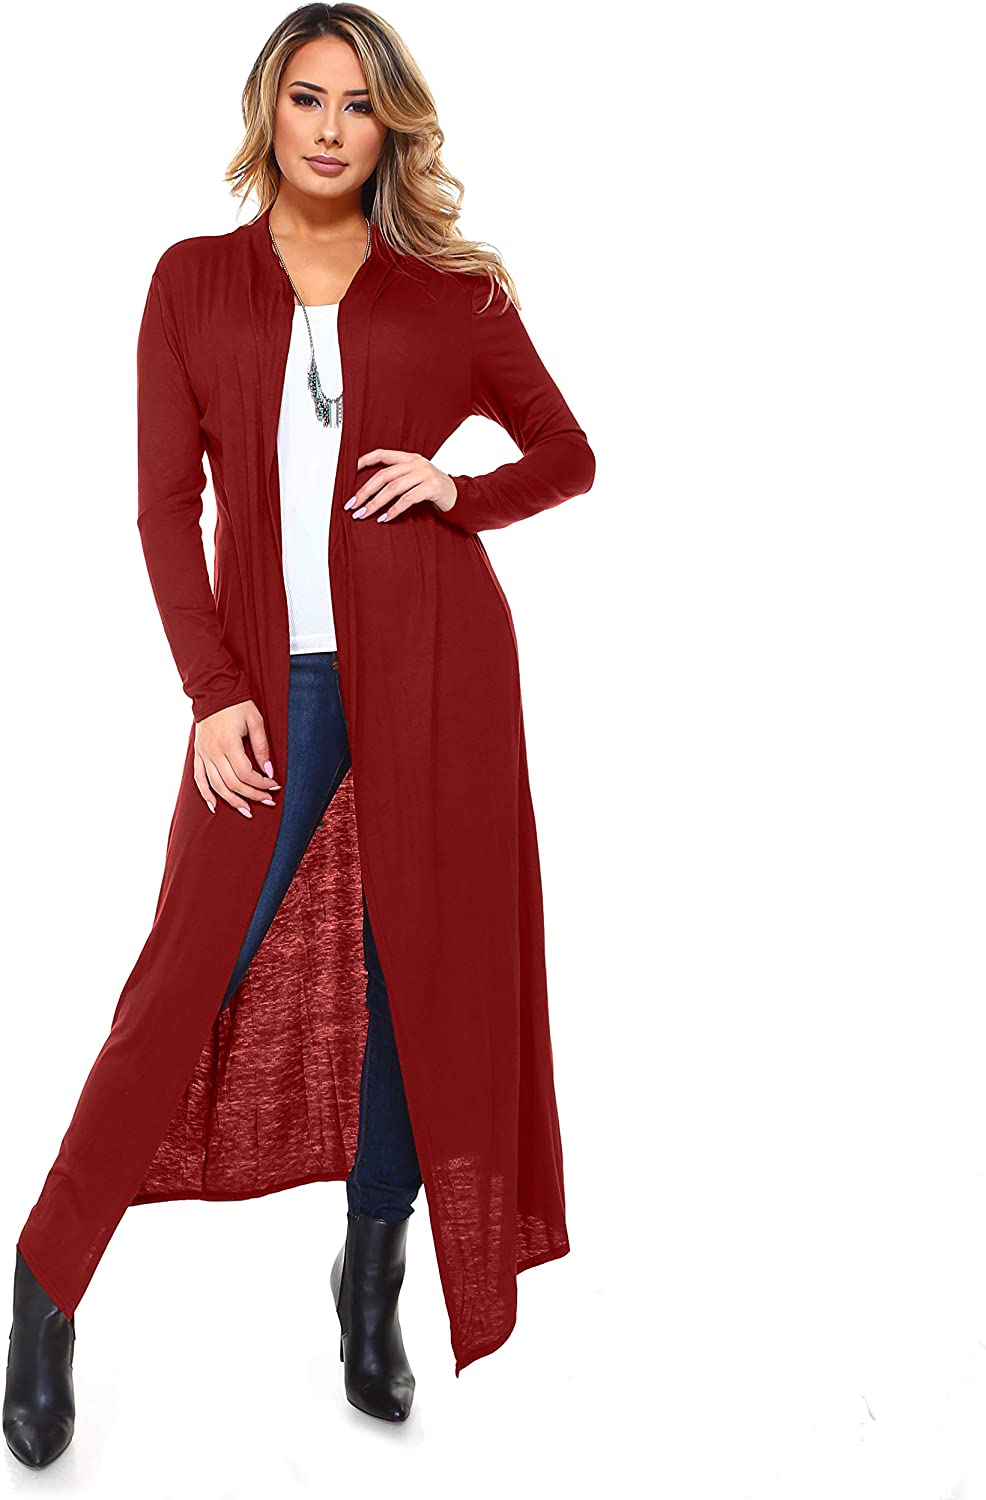 ALSLIAO Womens Long Sleeve Suit Open Front Office Cardigan Coat With  Pockets Outerwear Mei Red L 